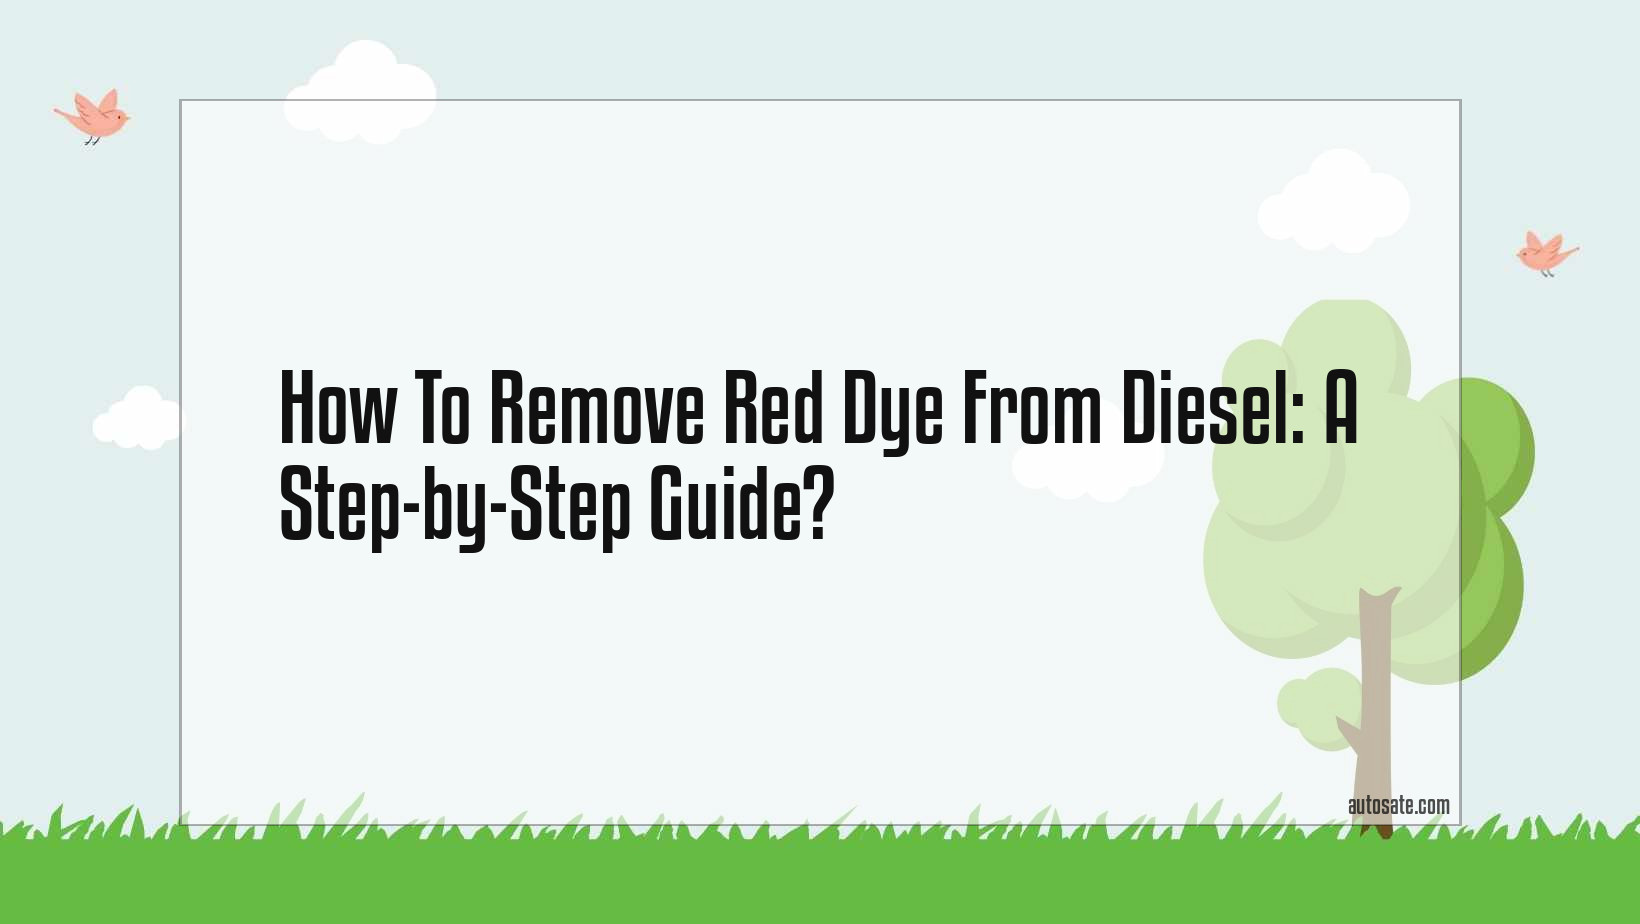 How To Remove Red Dye From Diesel: A Step-By-Step Guide